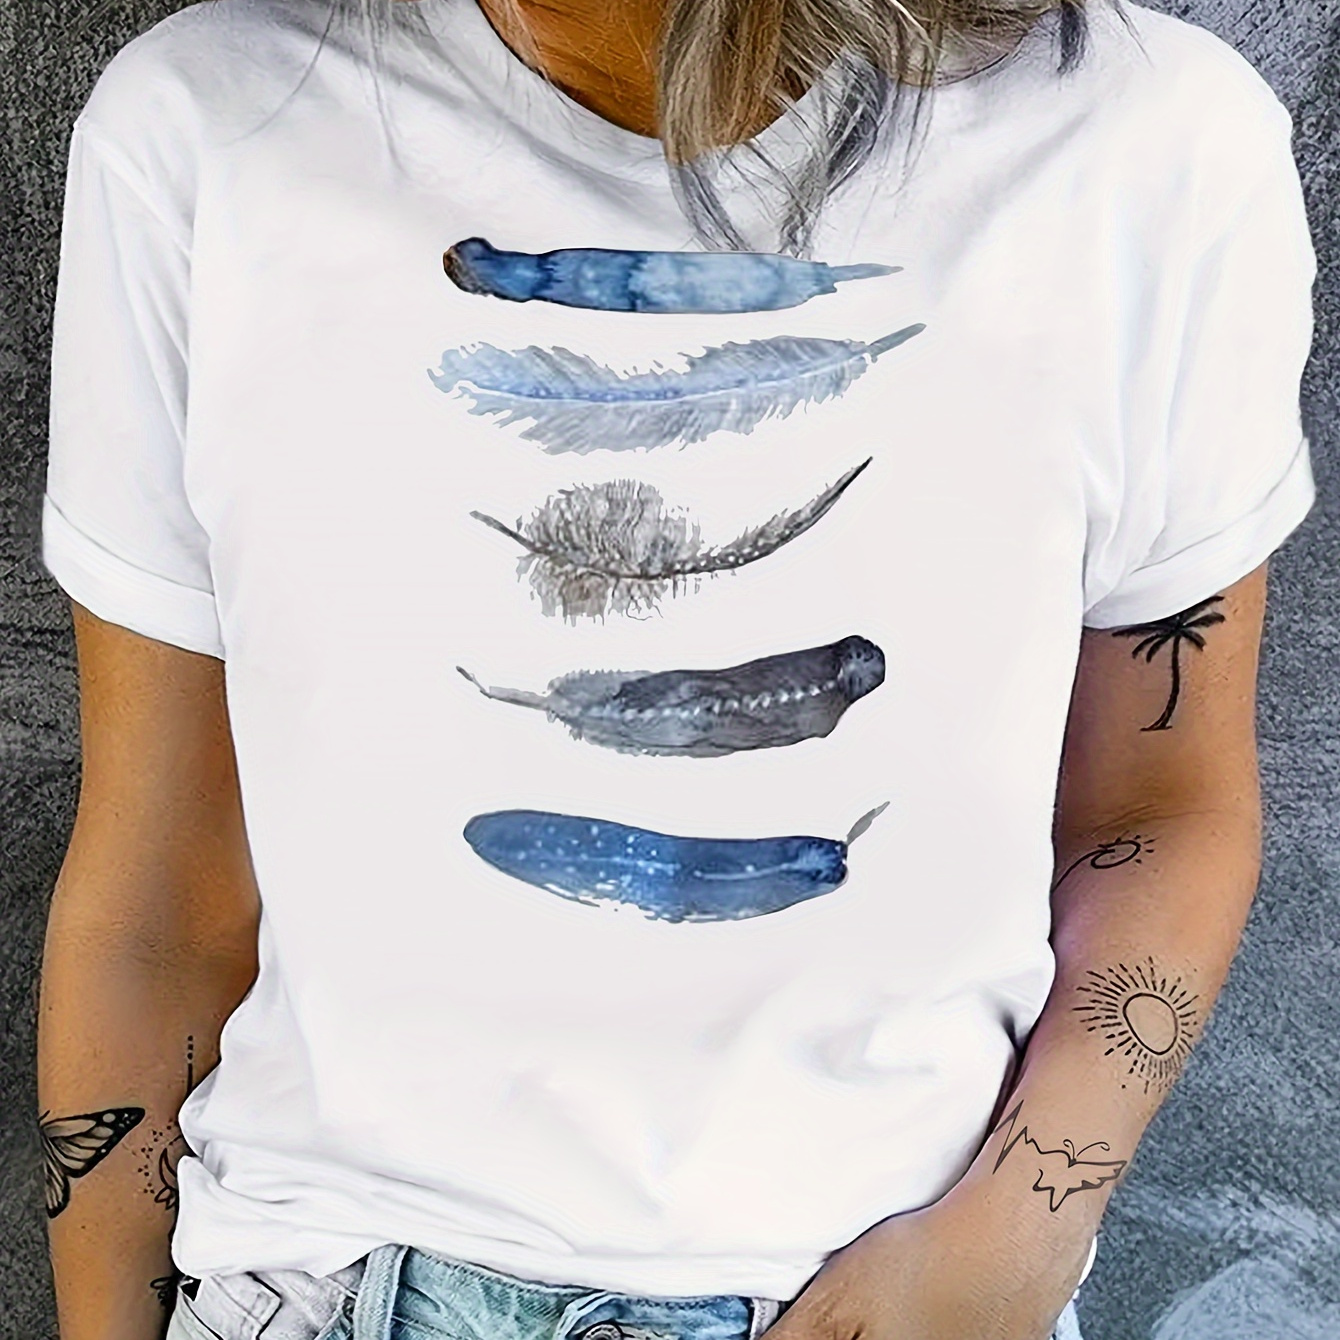 

Feathers Graphic Print T-shirt, Short Sleeve Crew Neck Casual Top For Summer & Spring, Women's Clothing